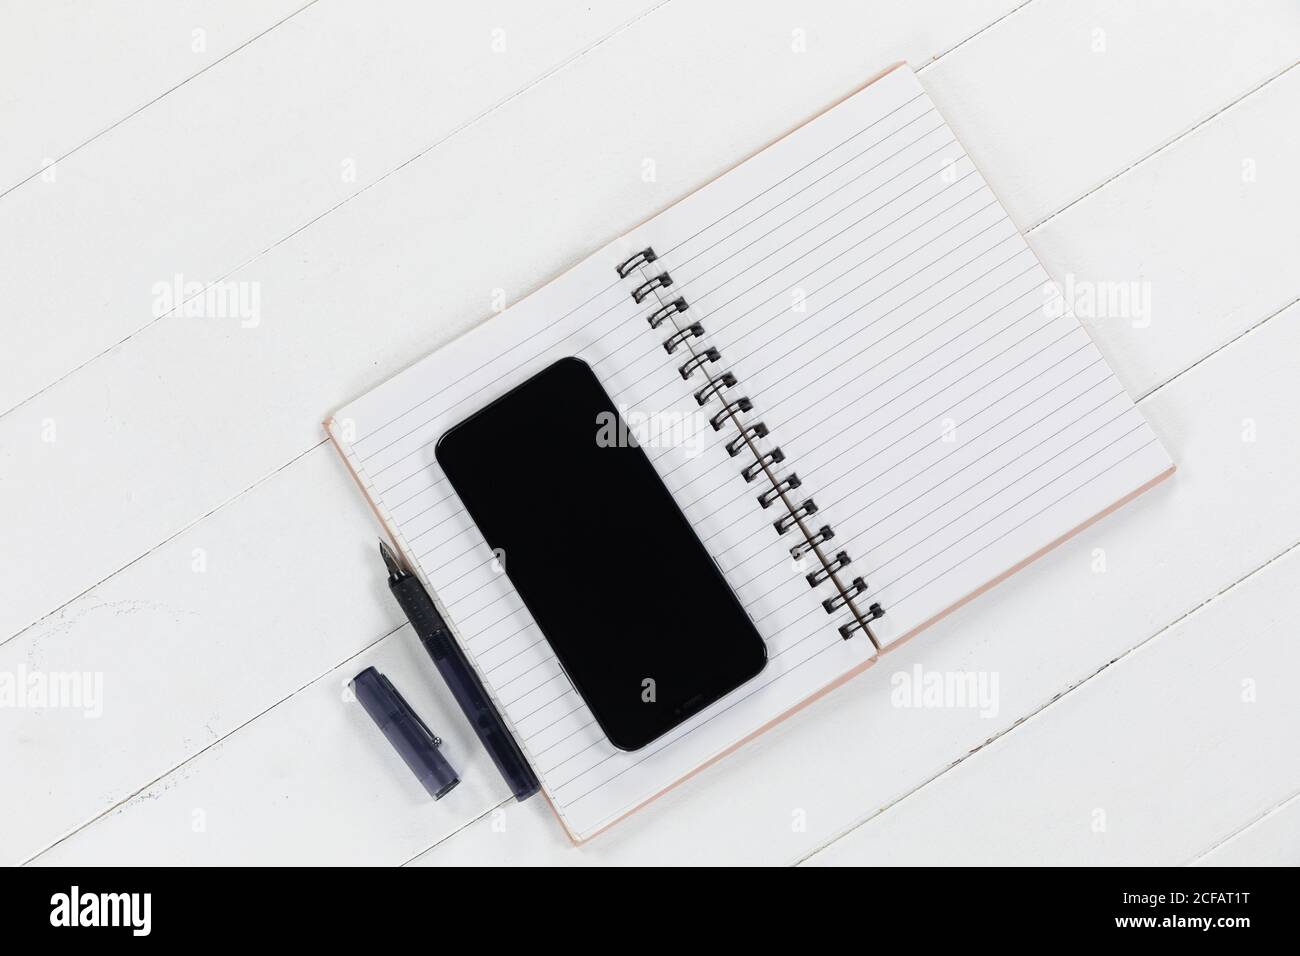 View of a black smartphone, a notebook and a black pen on plain white background Stock Photo